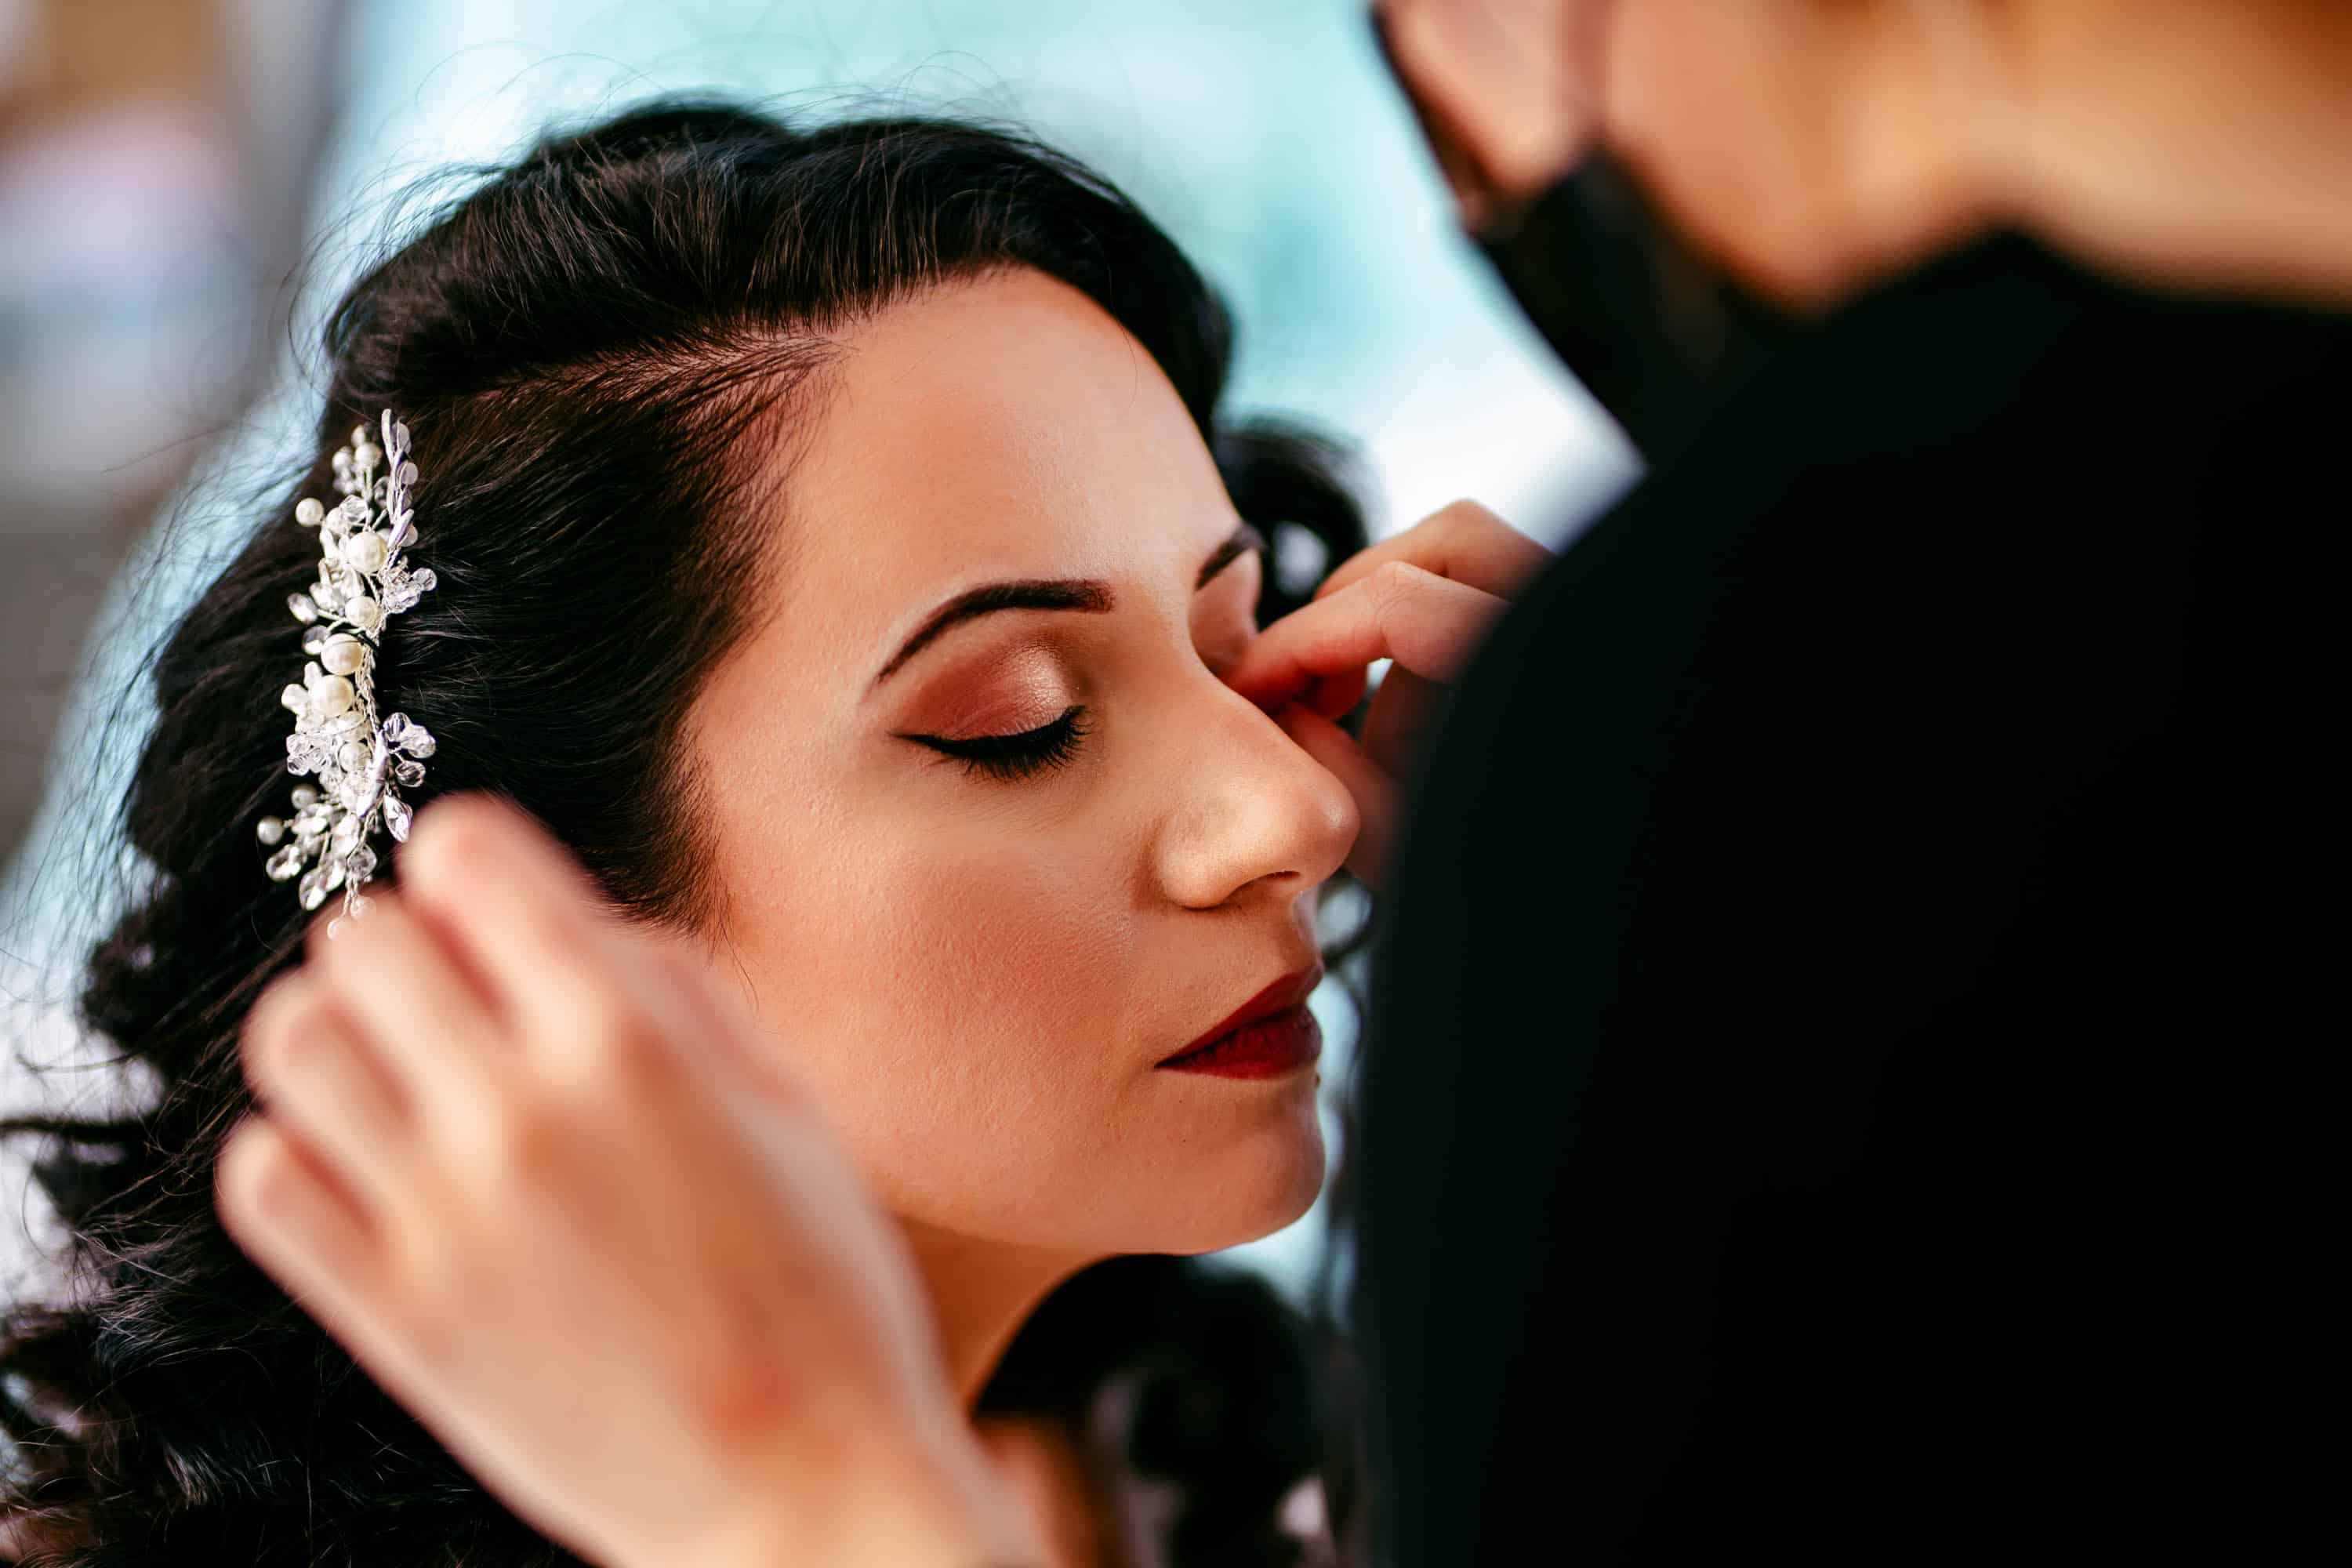 A bride having her make-up done by a make-up artist.